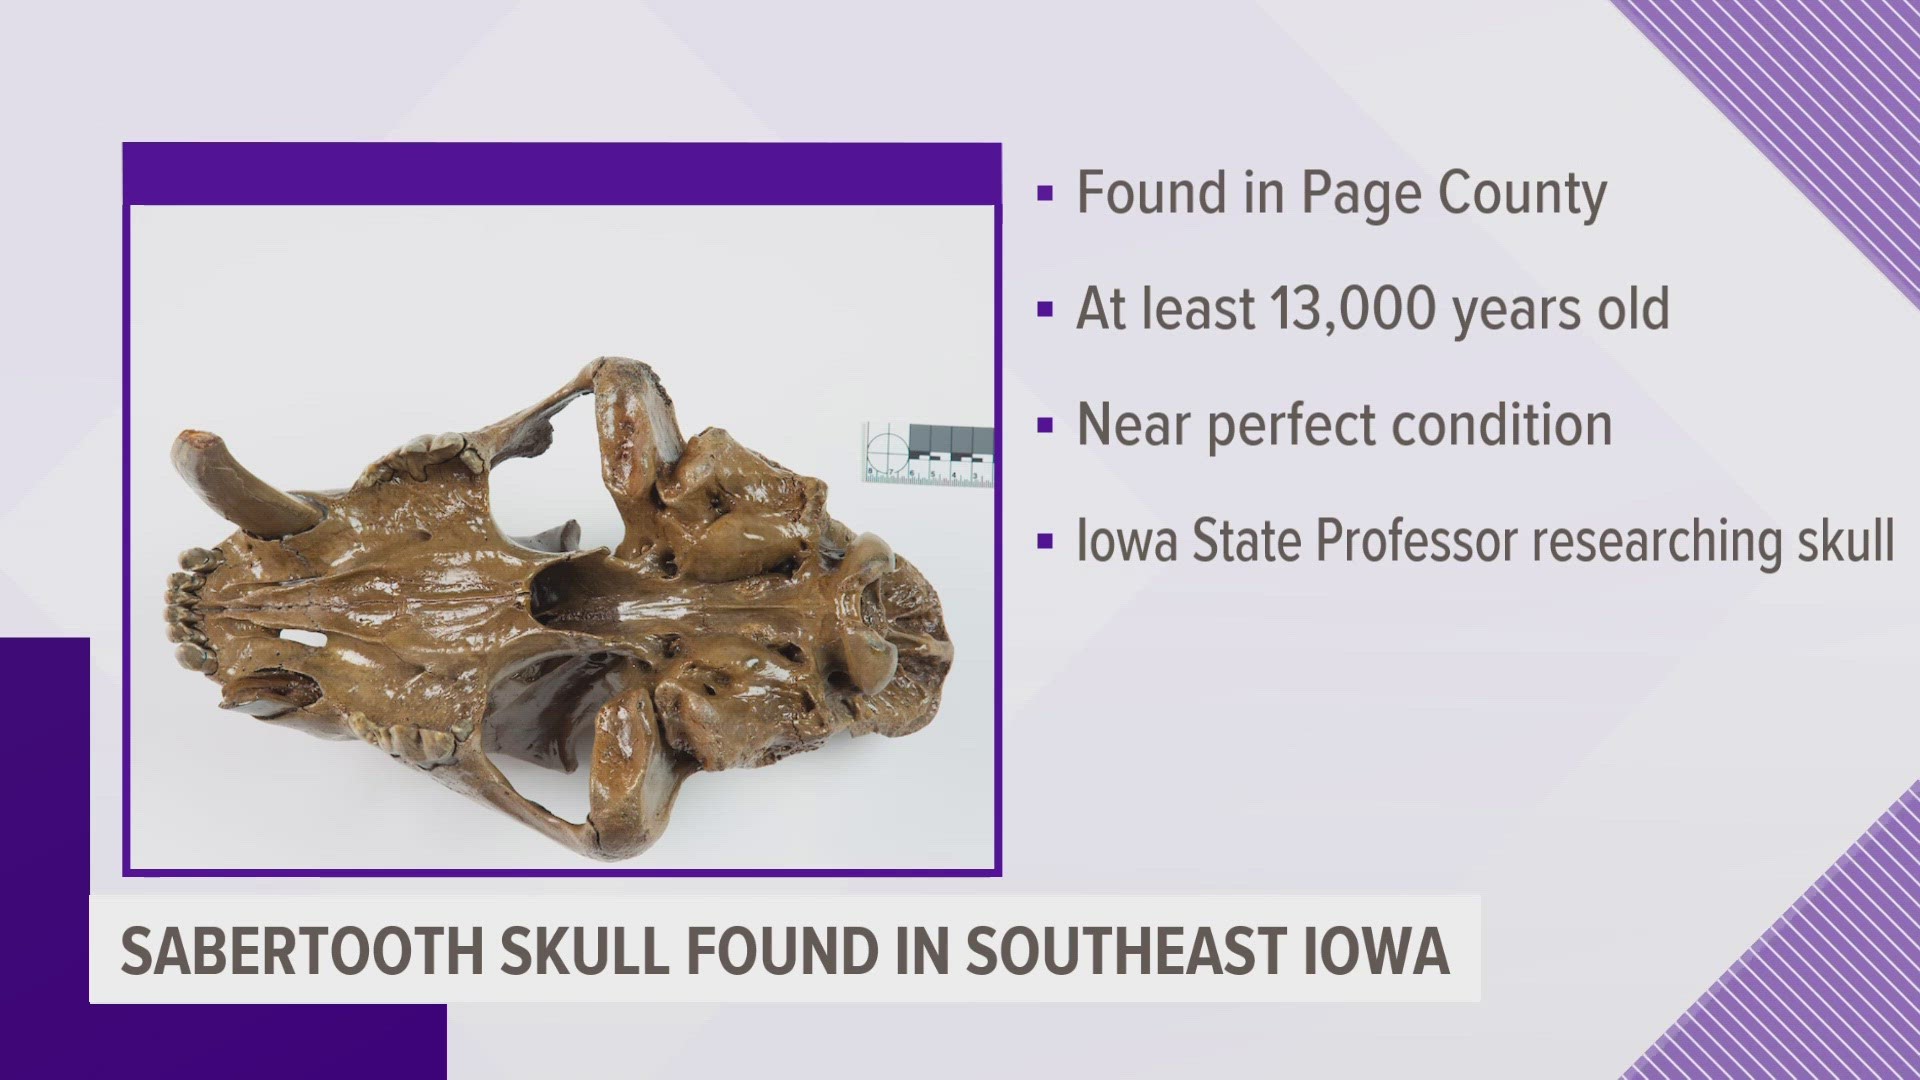 The skull is at least 13,000 years old and reveals new details about the Ice Age predator.